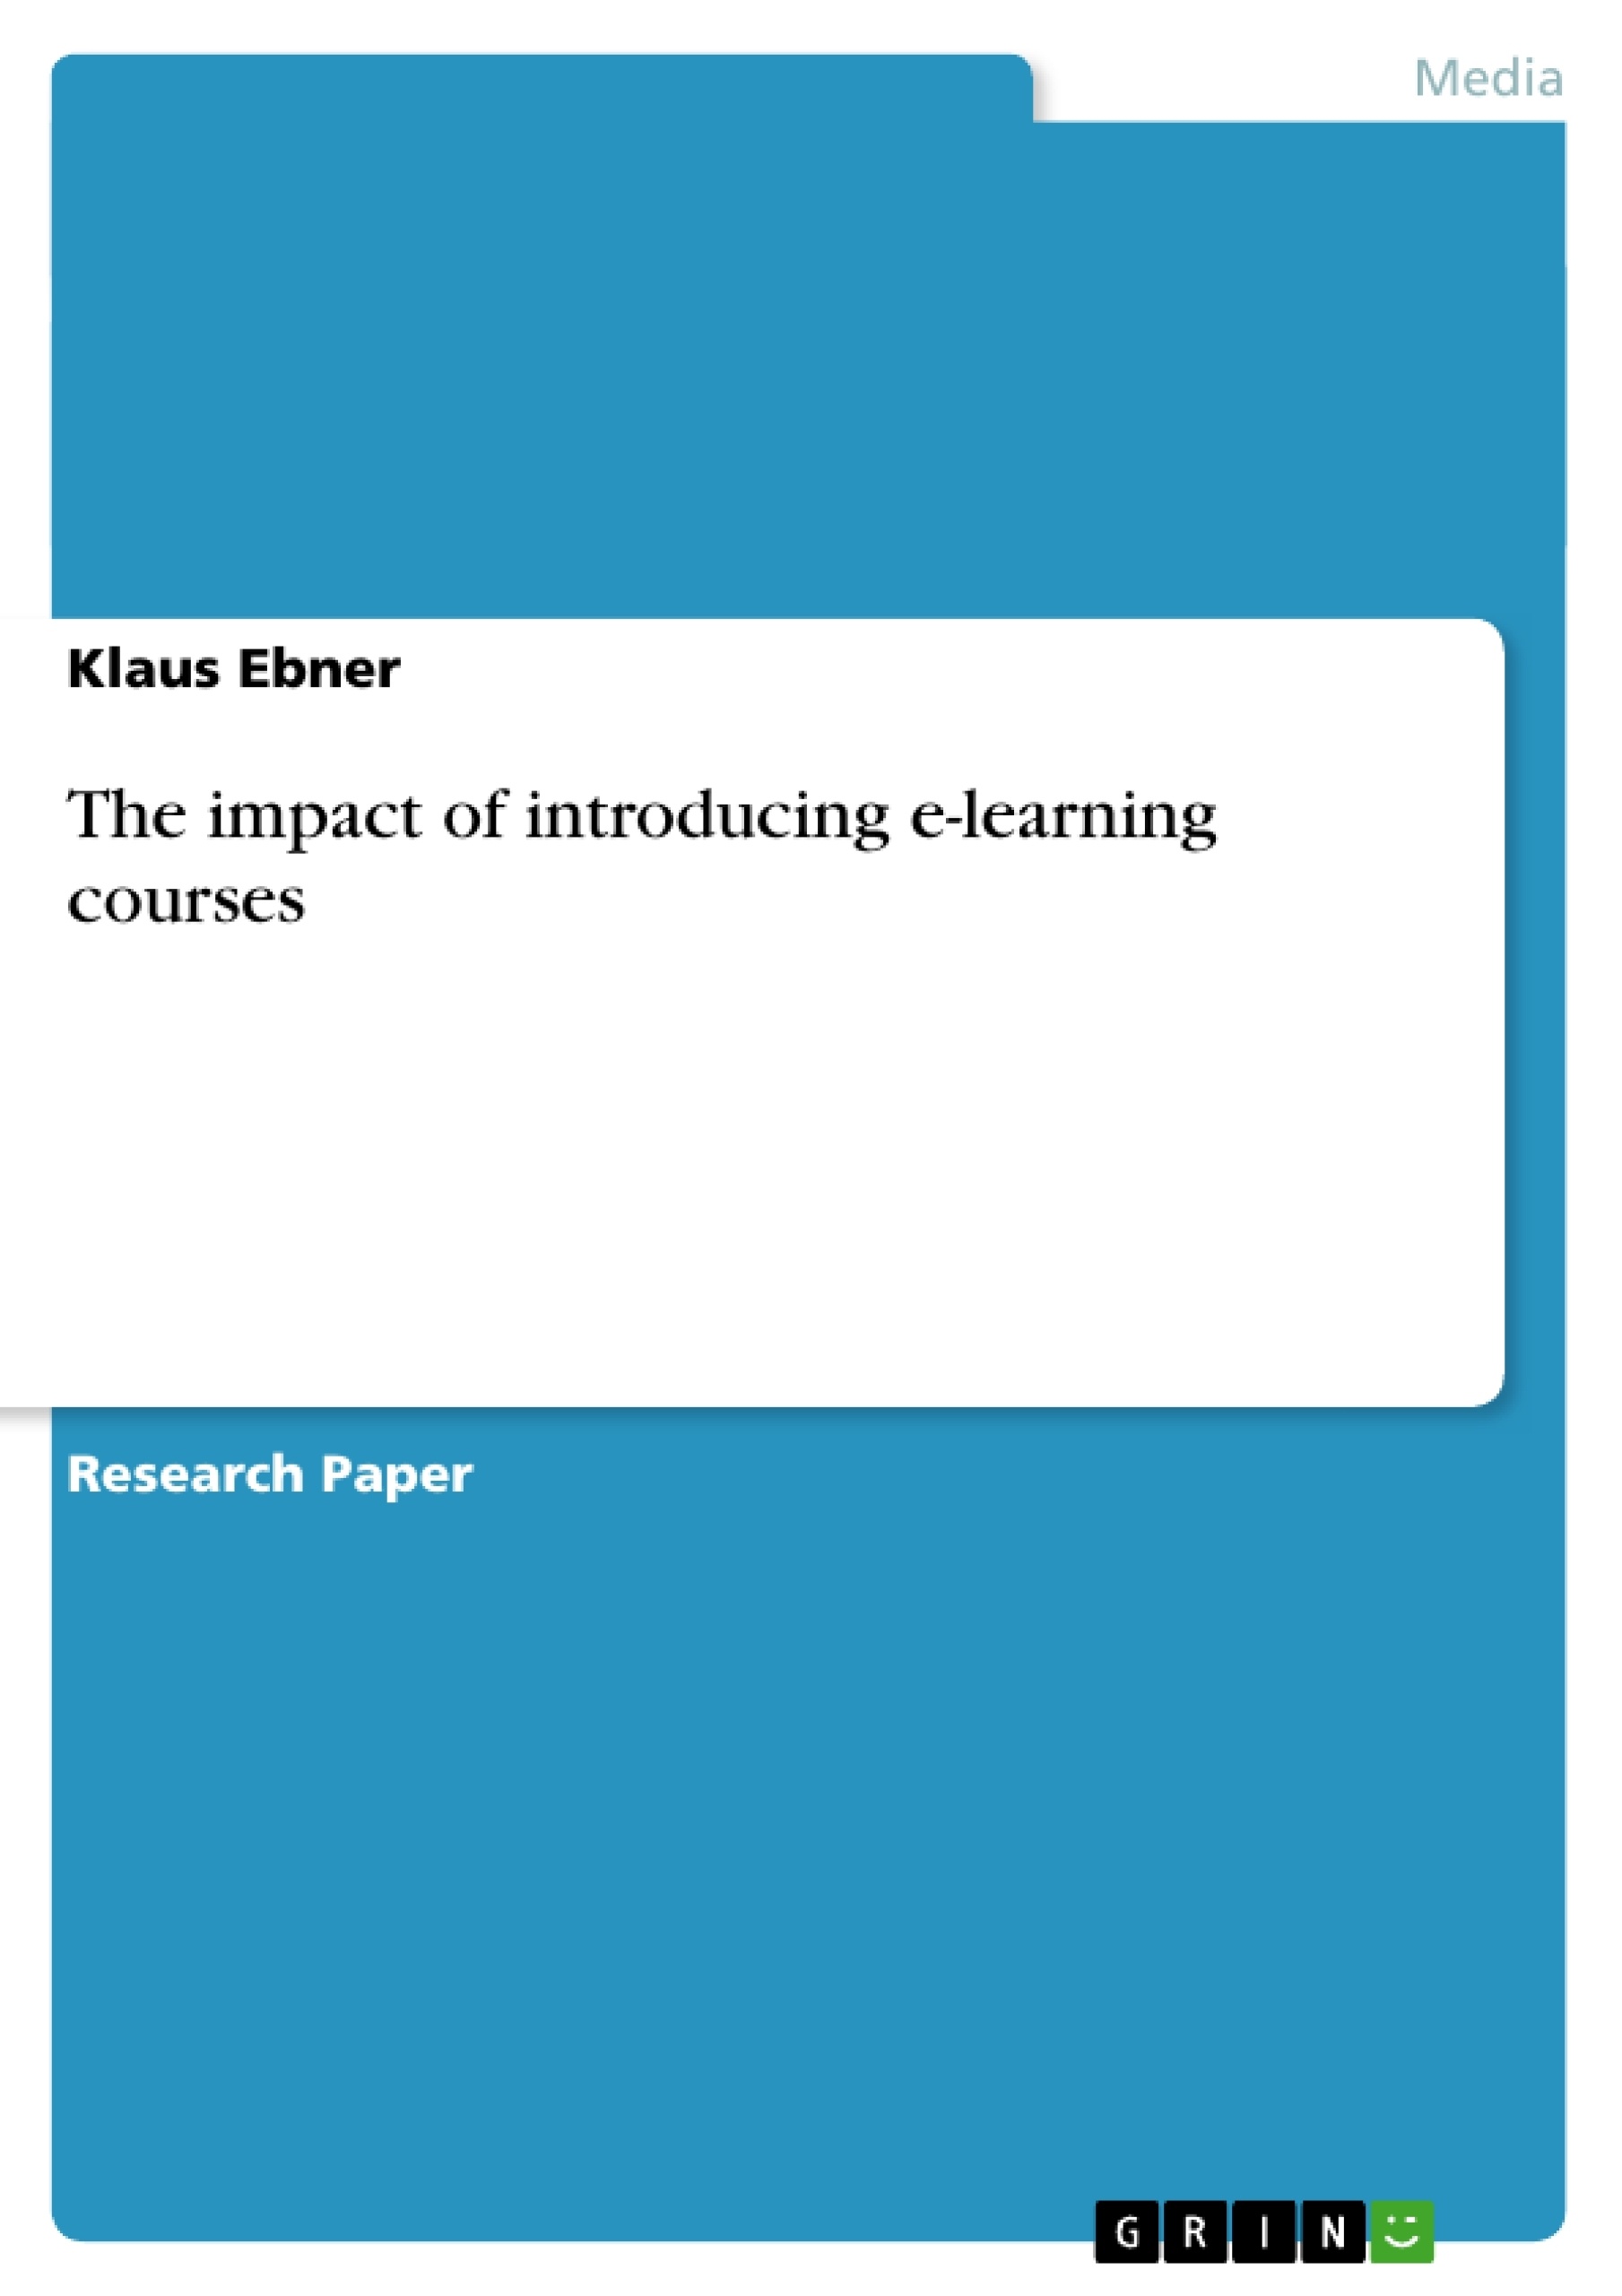 Title: The impact of introducing e-learning courses